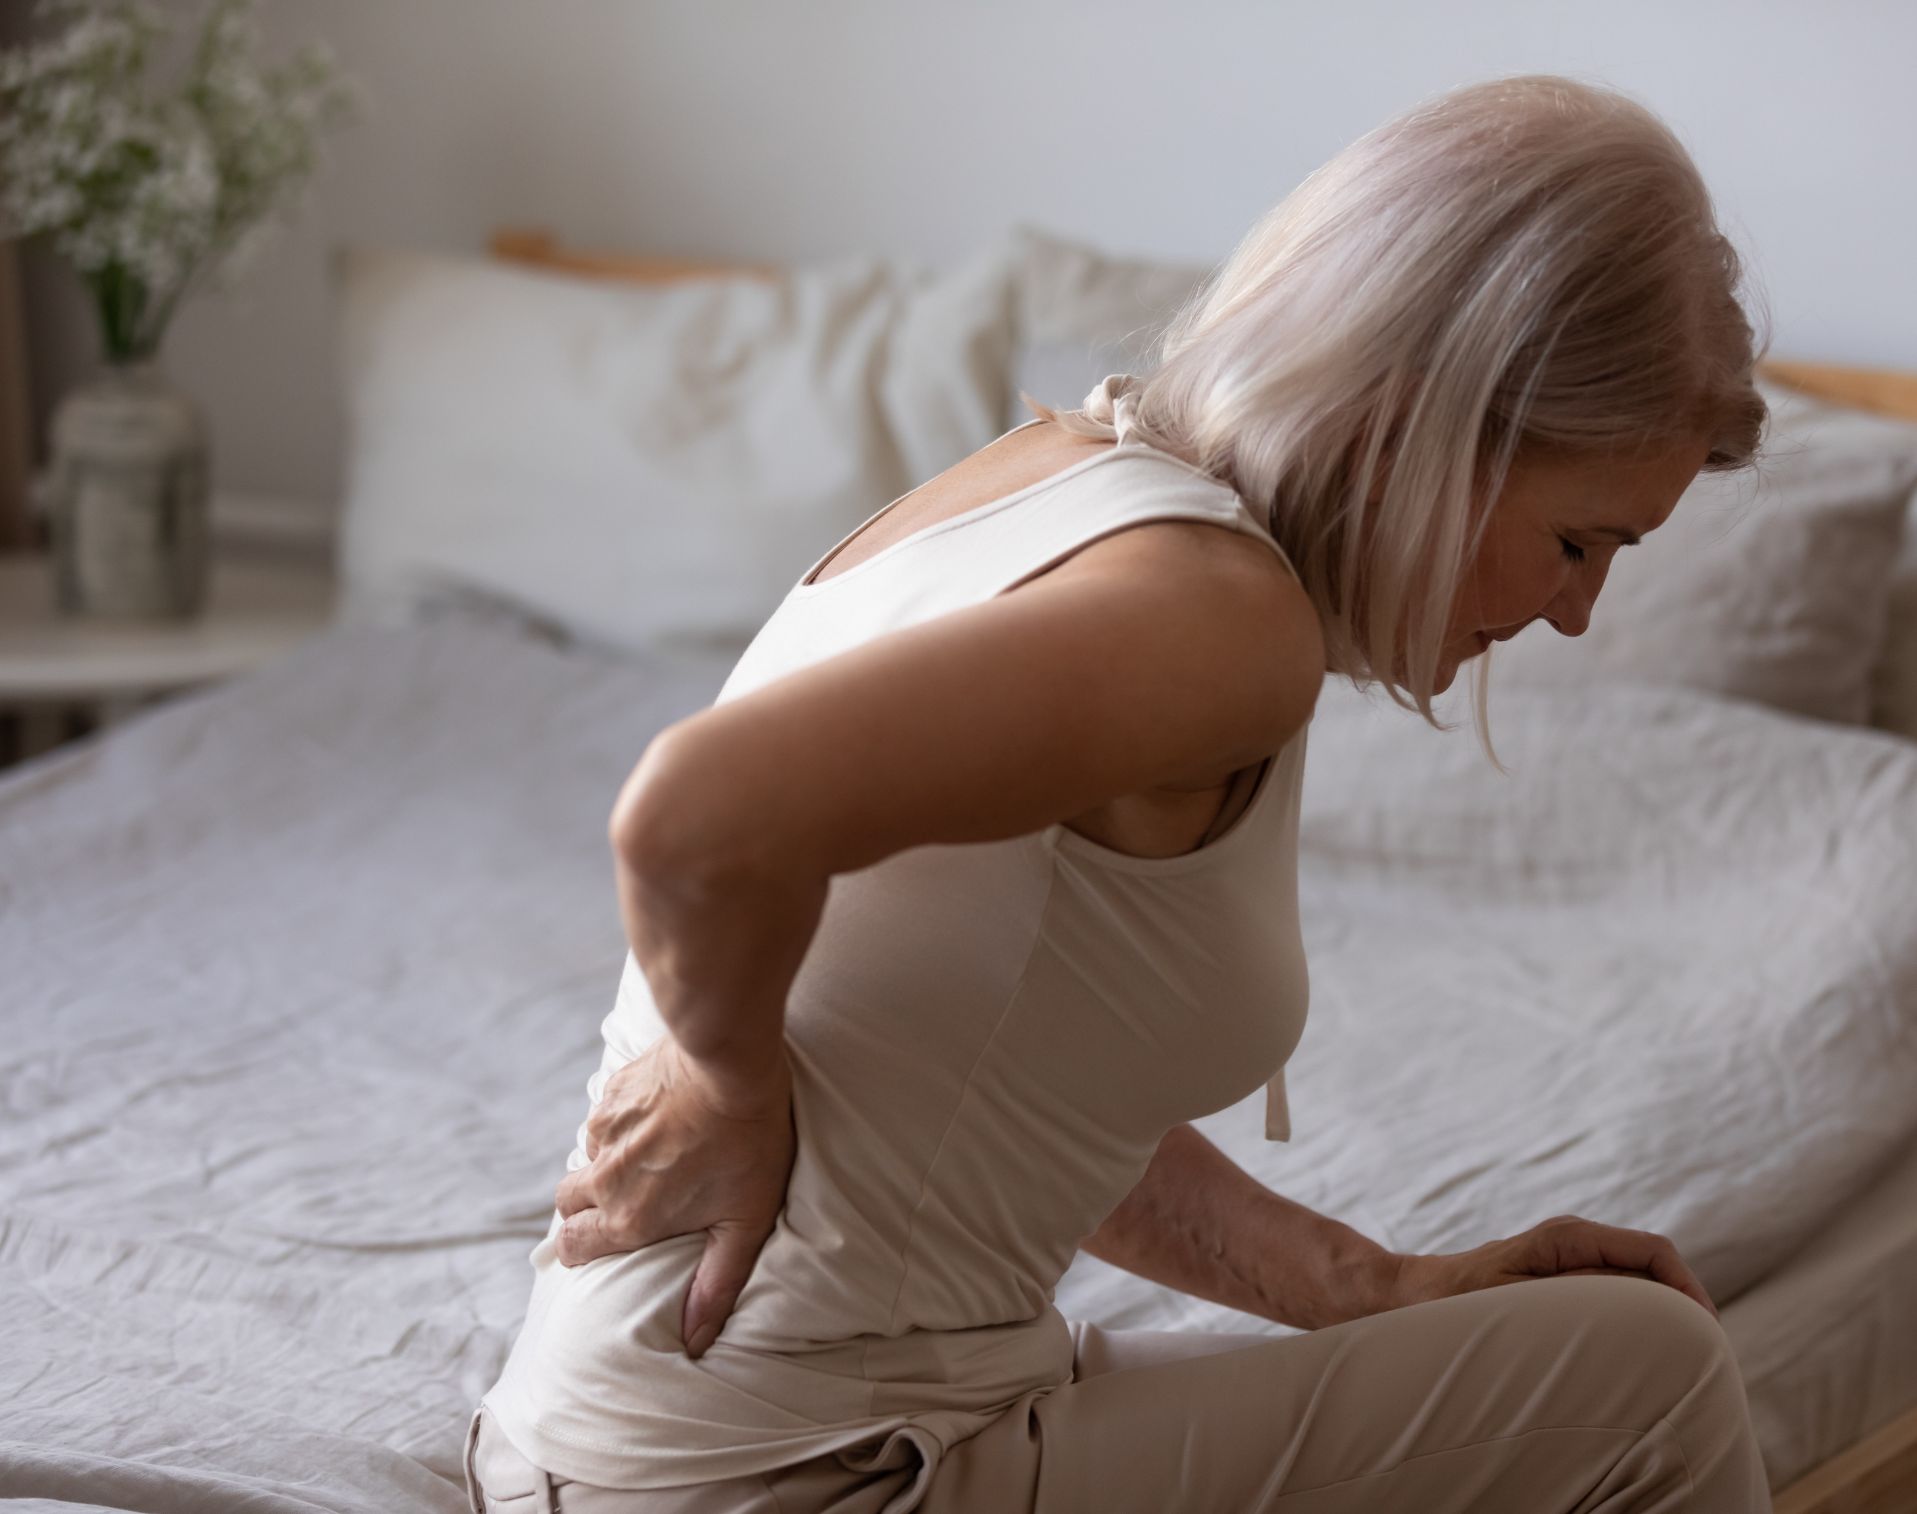 Women sitting on bed with back pain from osteoporosis